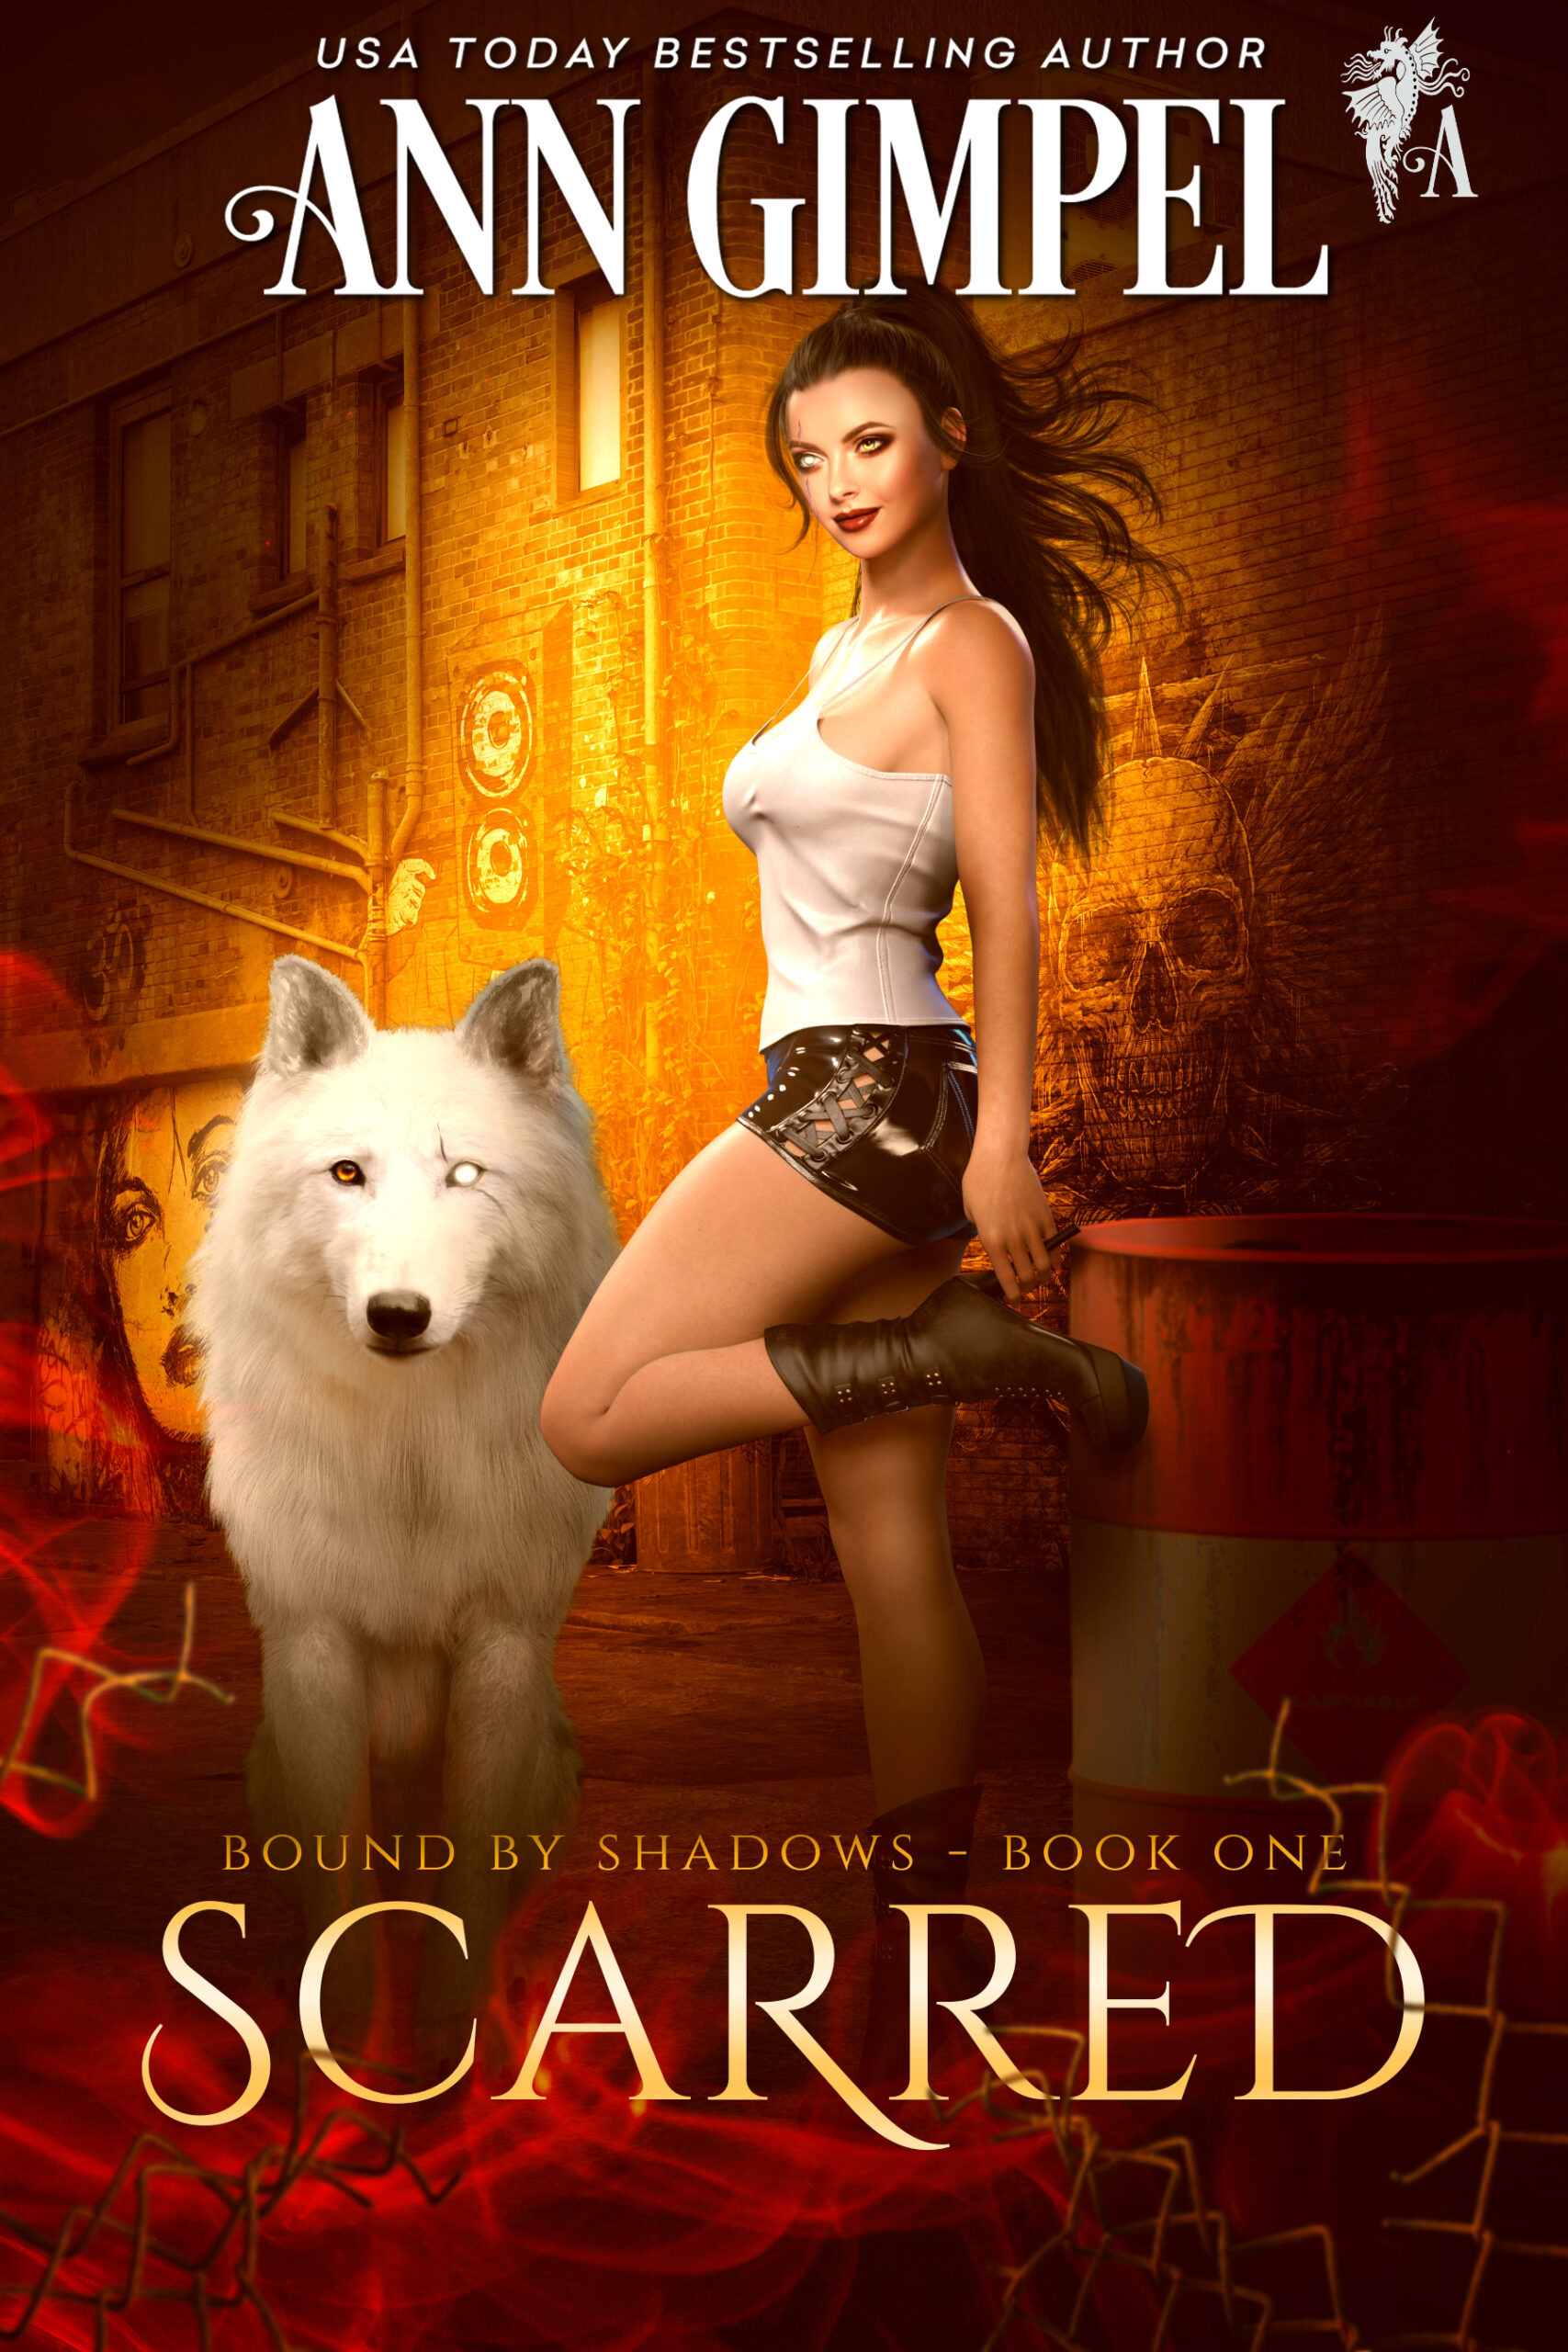 Scarred, Bound by Shadows Book One